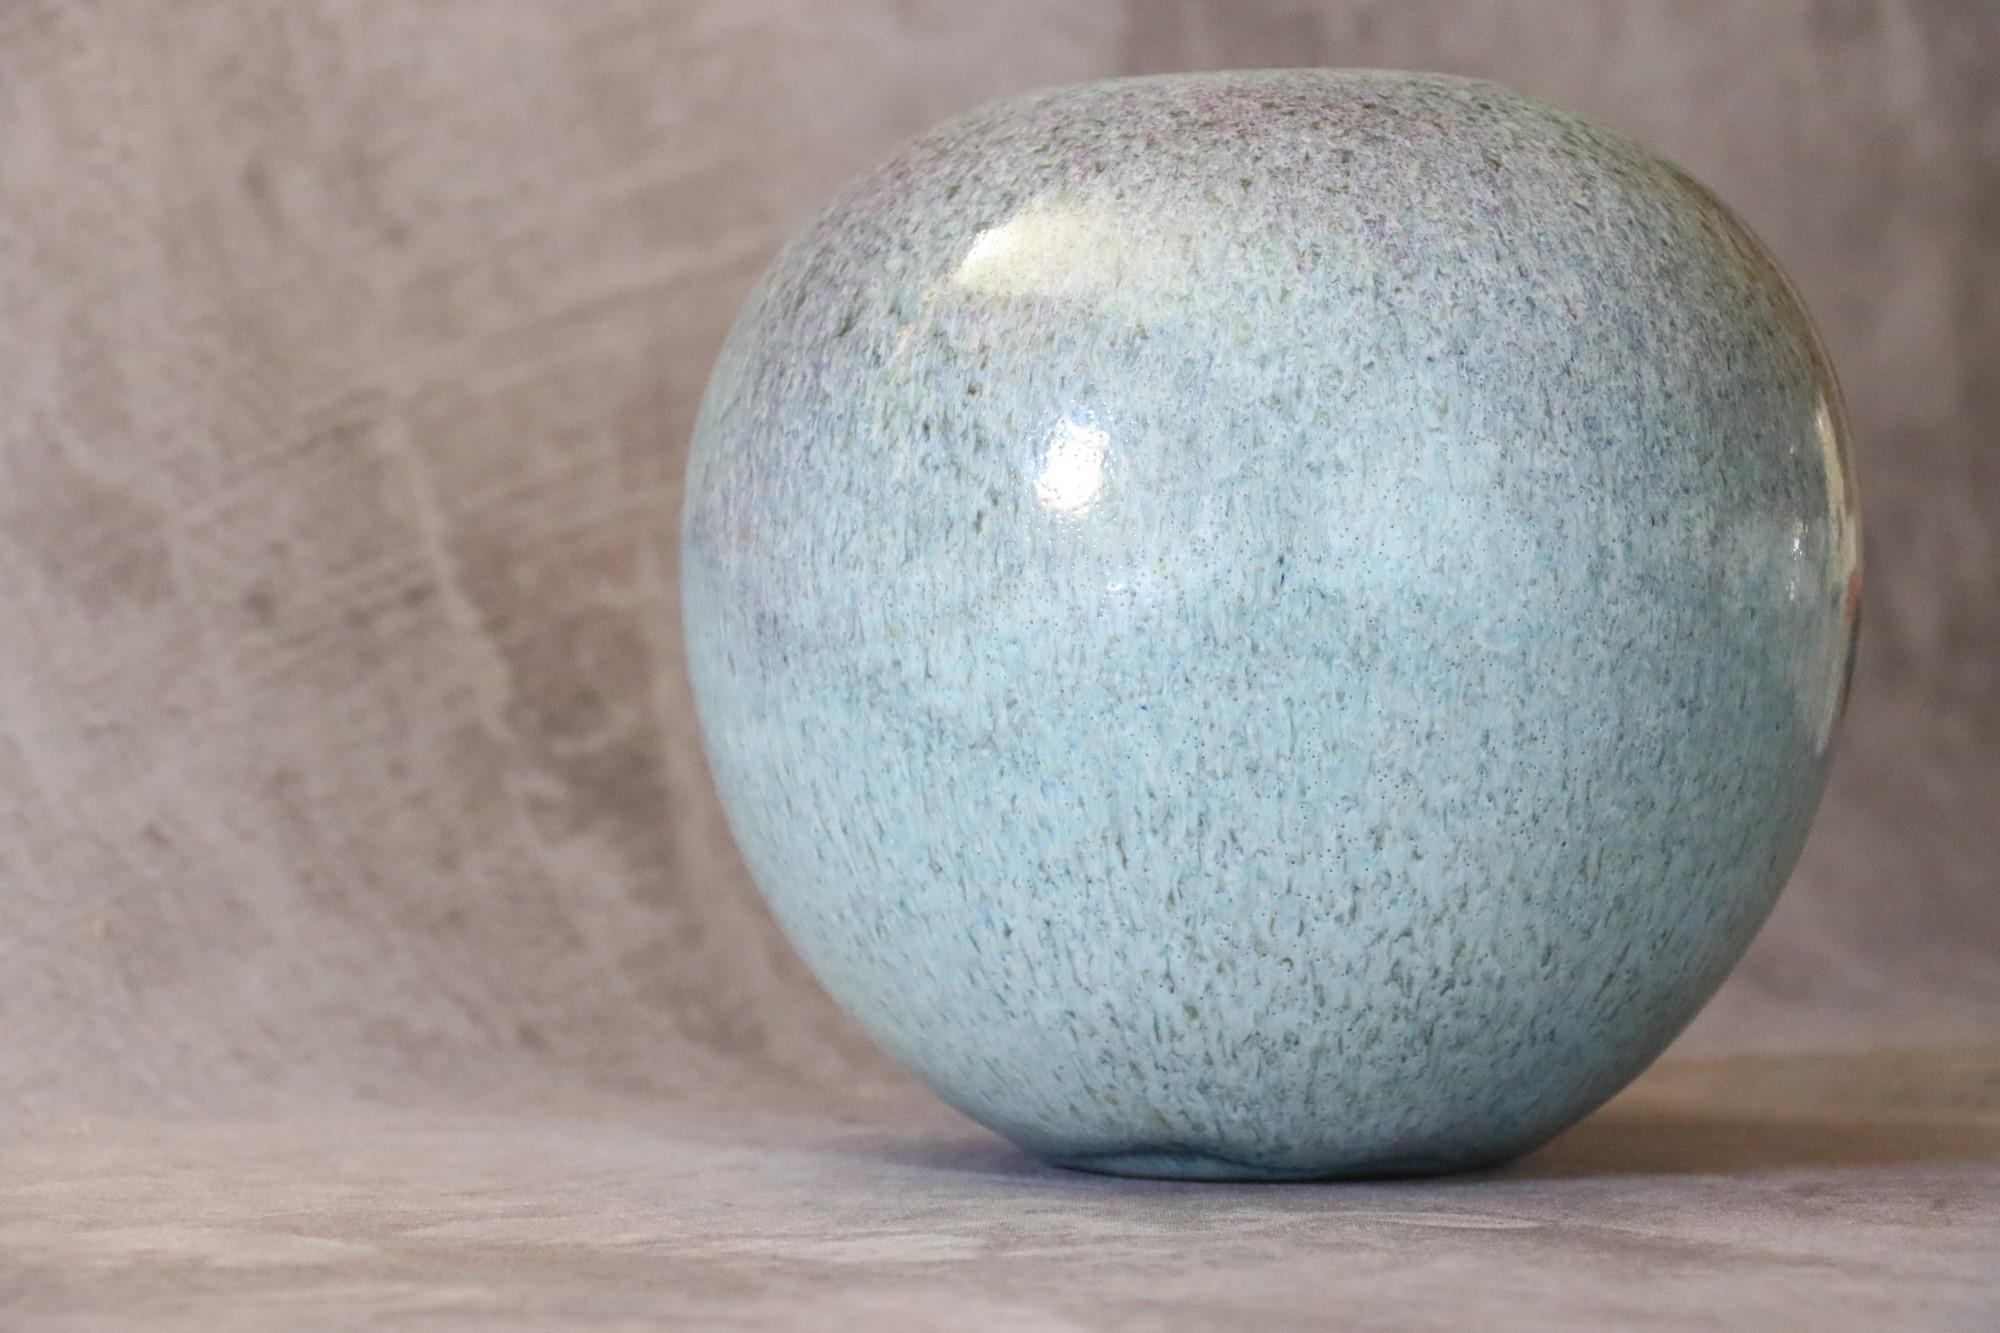 French Ceramic large ball vase by Marc Uzan - circa 2000.
Delicate enamelling in shades of blue and some touches of purple - Ring neck.
Signed under the base
Very good condition

--------------------------
Born in Sousse, Tunisia in 1955, Marc